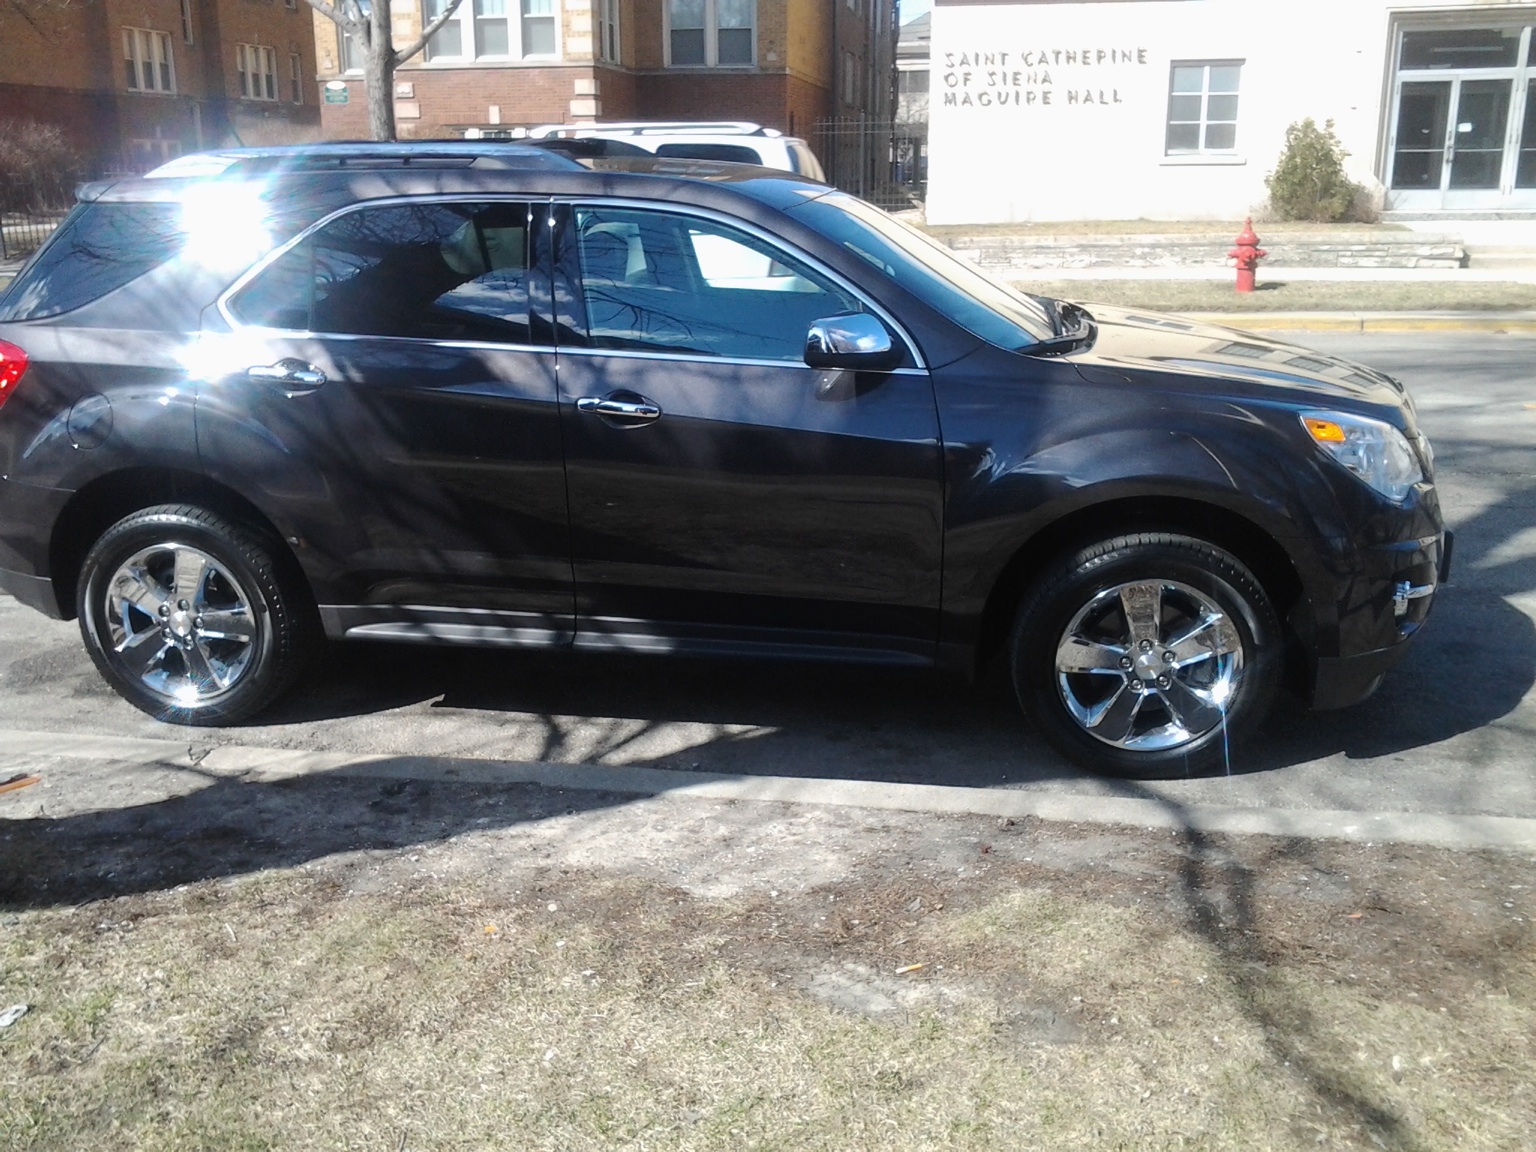 My Week With a 2013 Chevy Equinox | Nikeya Young - Actress/Model/Singer